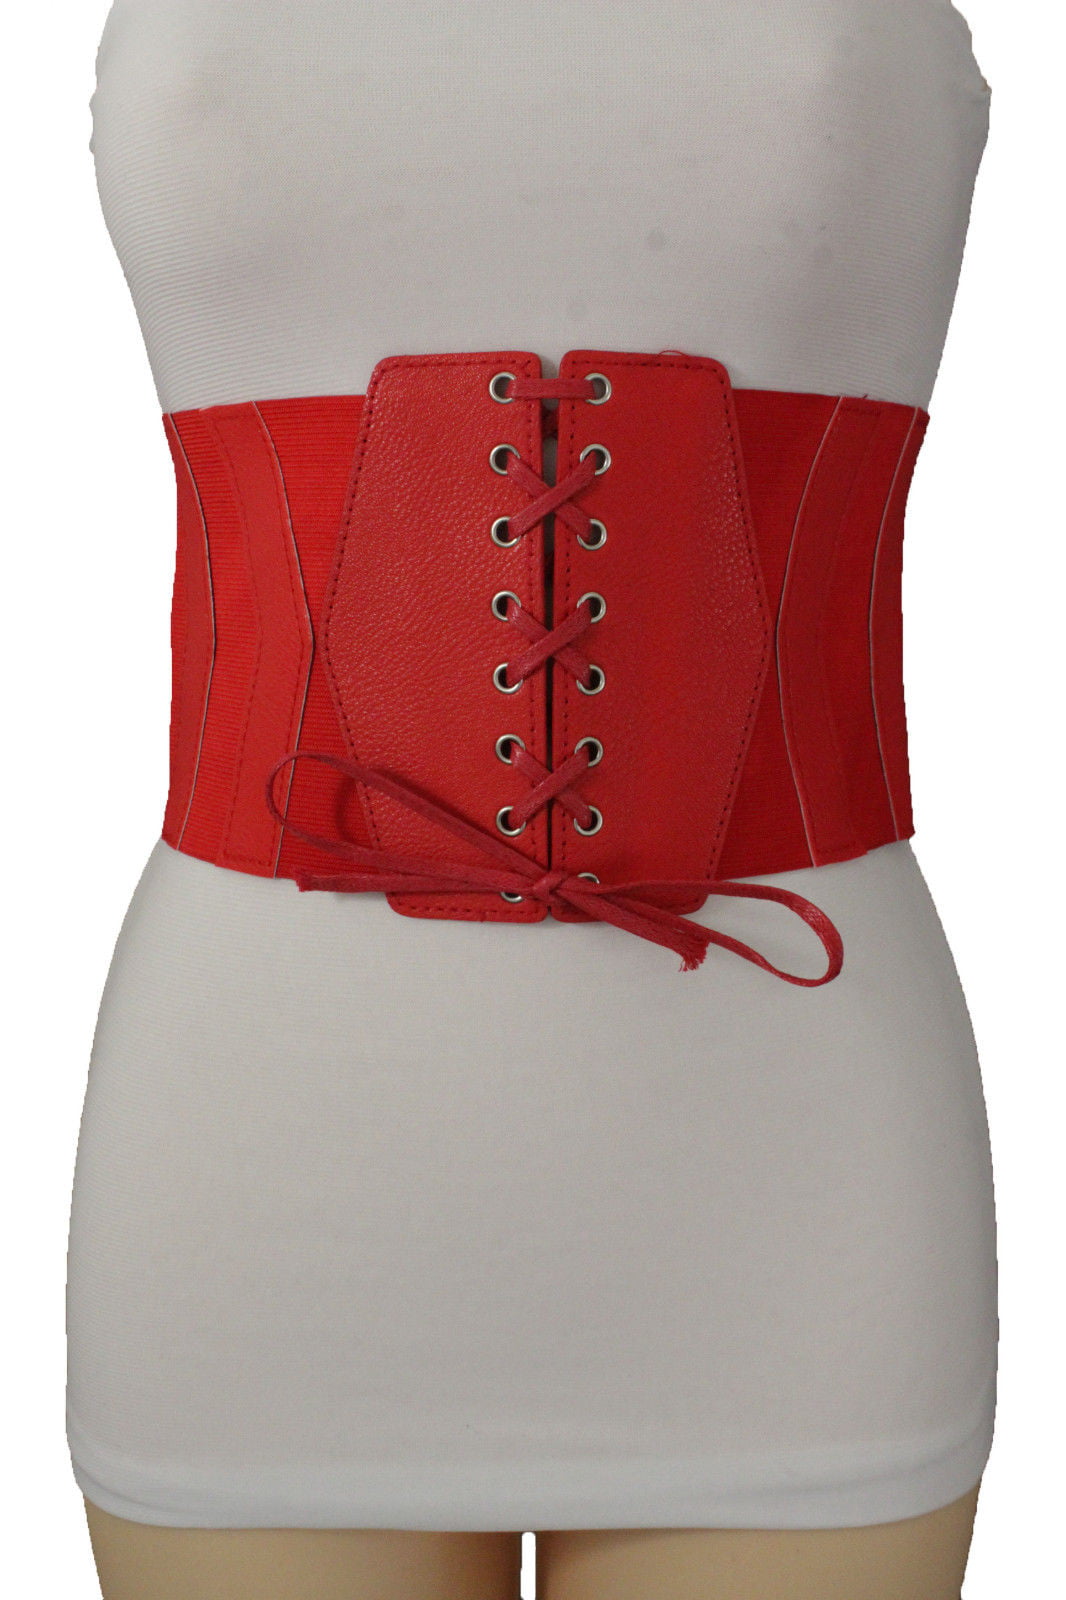 Alwaystyle4You - Women Red Faux Leather Wide Fashion Corset Belt High